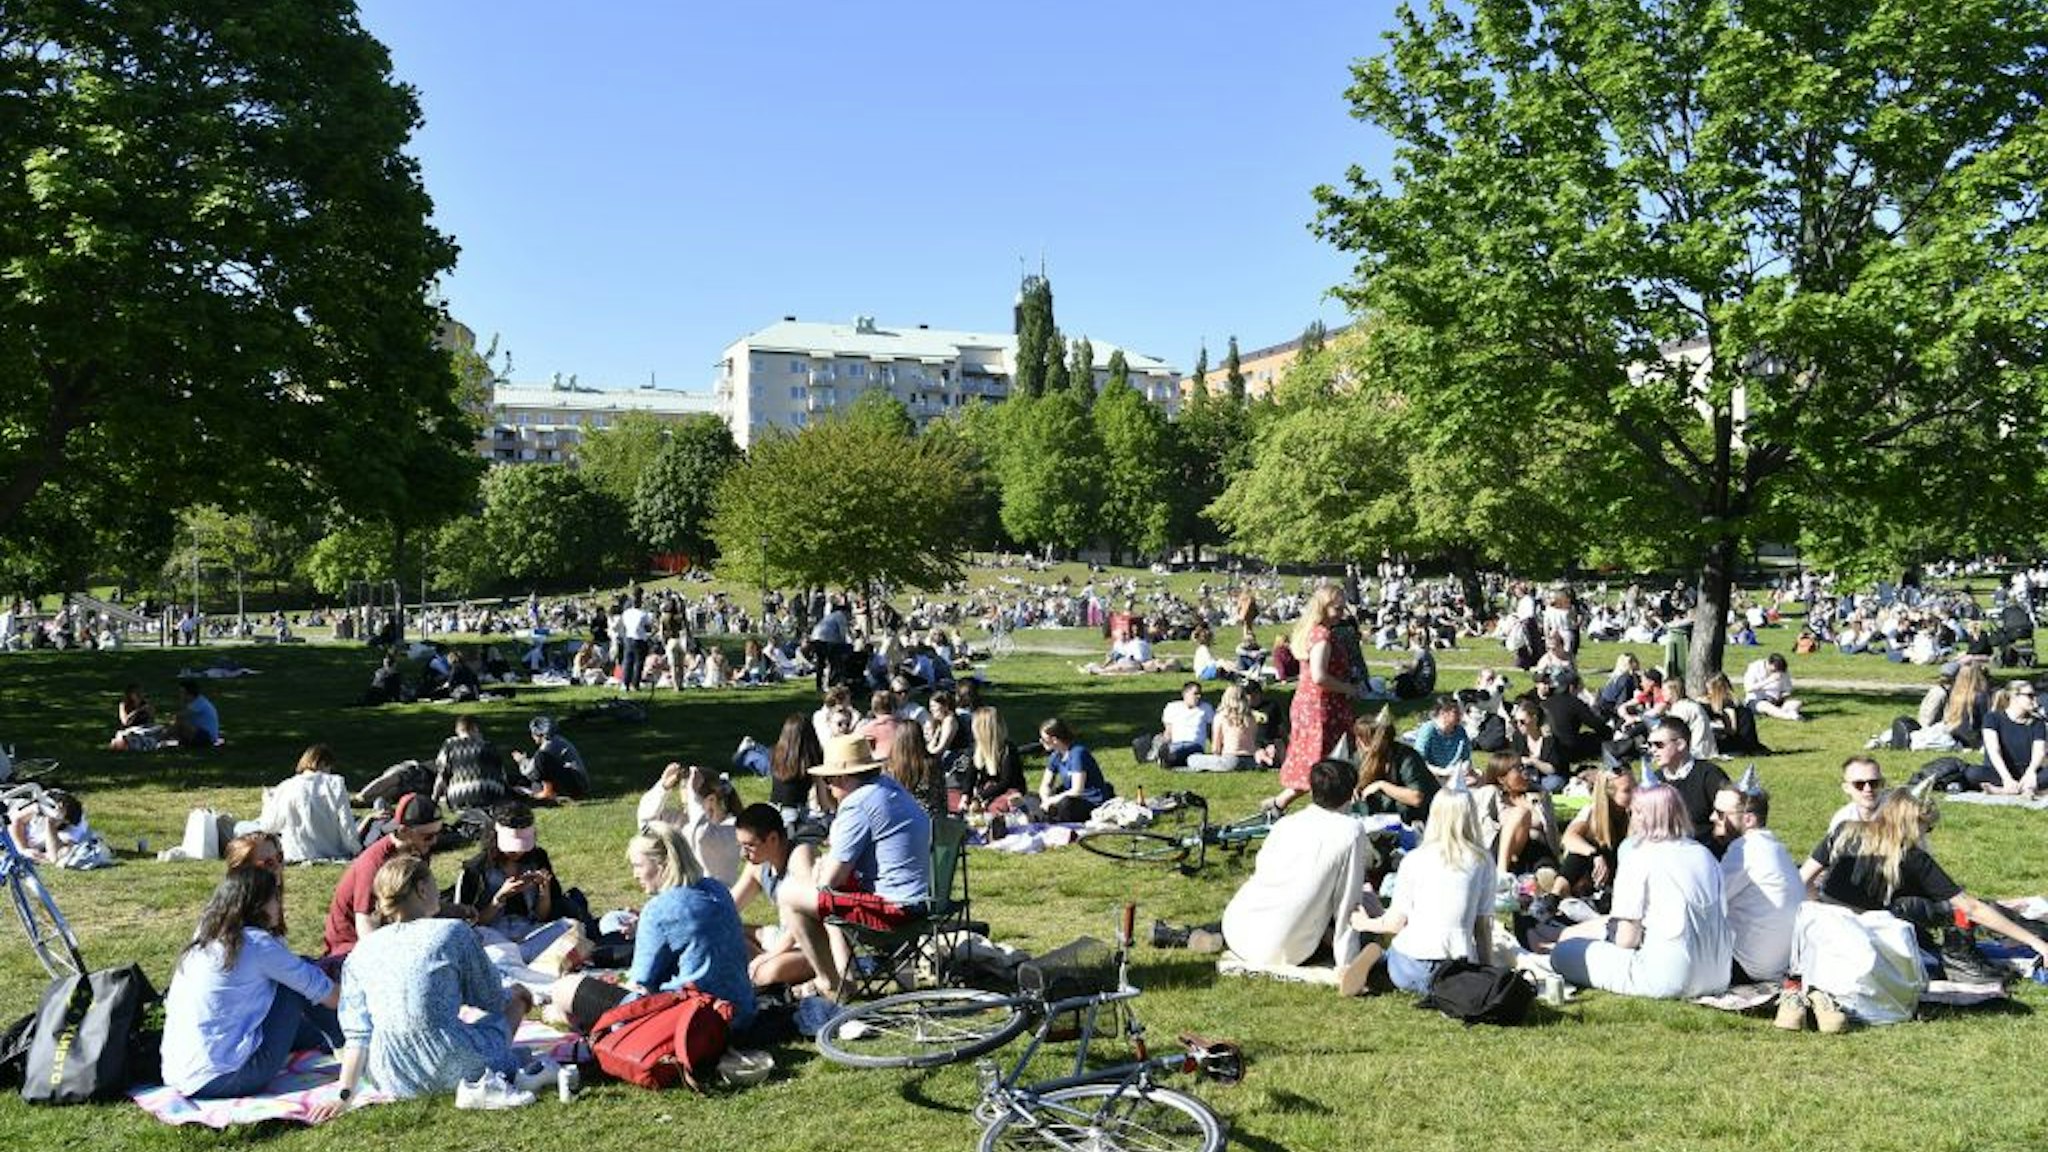 People enjoy the sunny weather in Tantolunden park in Stockholm on May 30, 2020, amid the novel coronavirus pandemic.